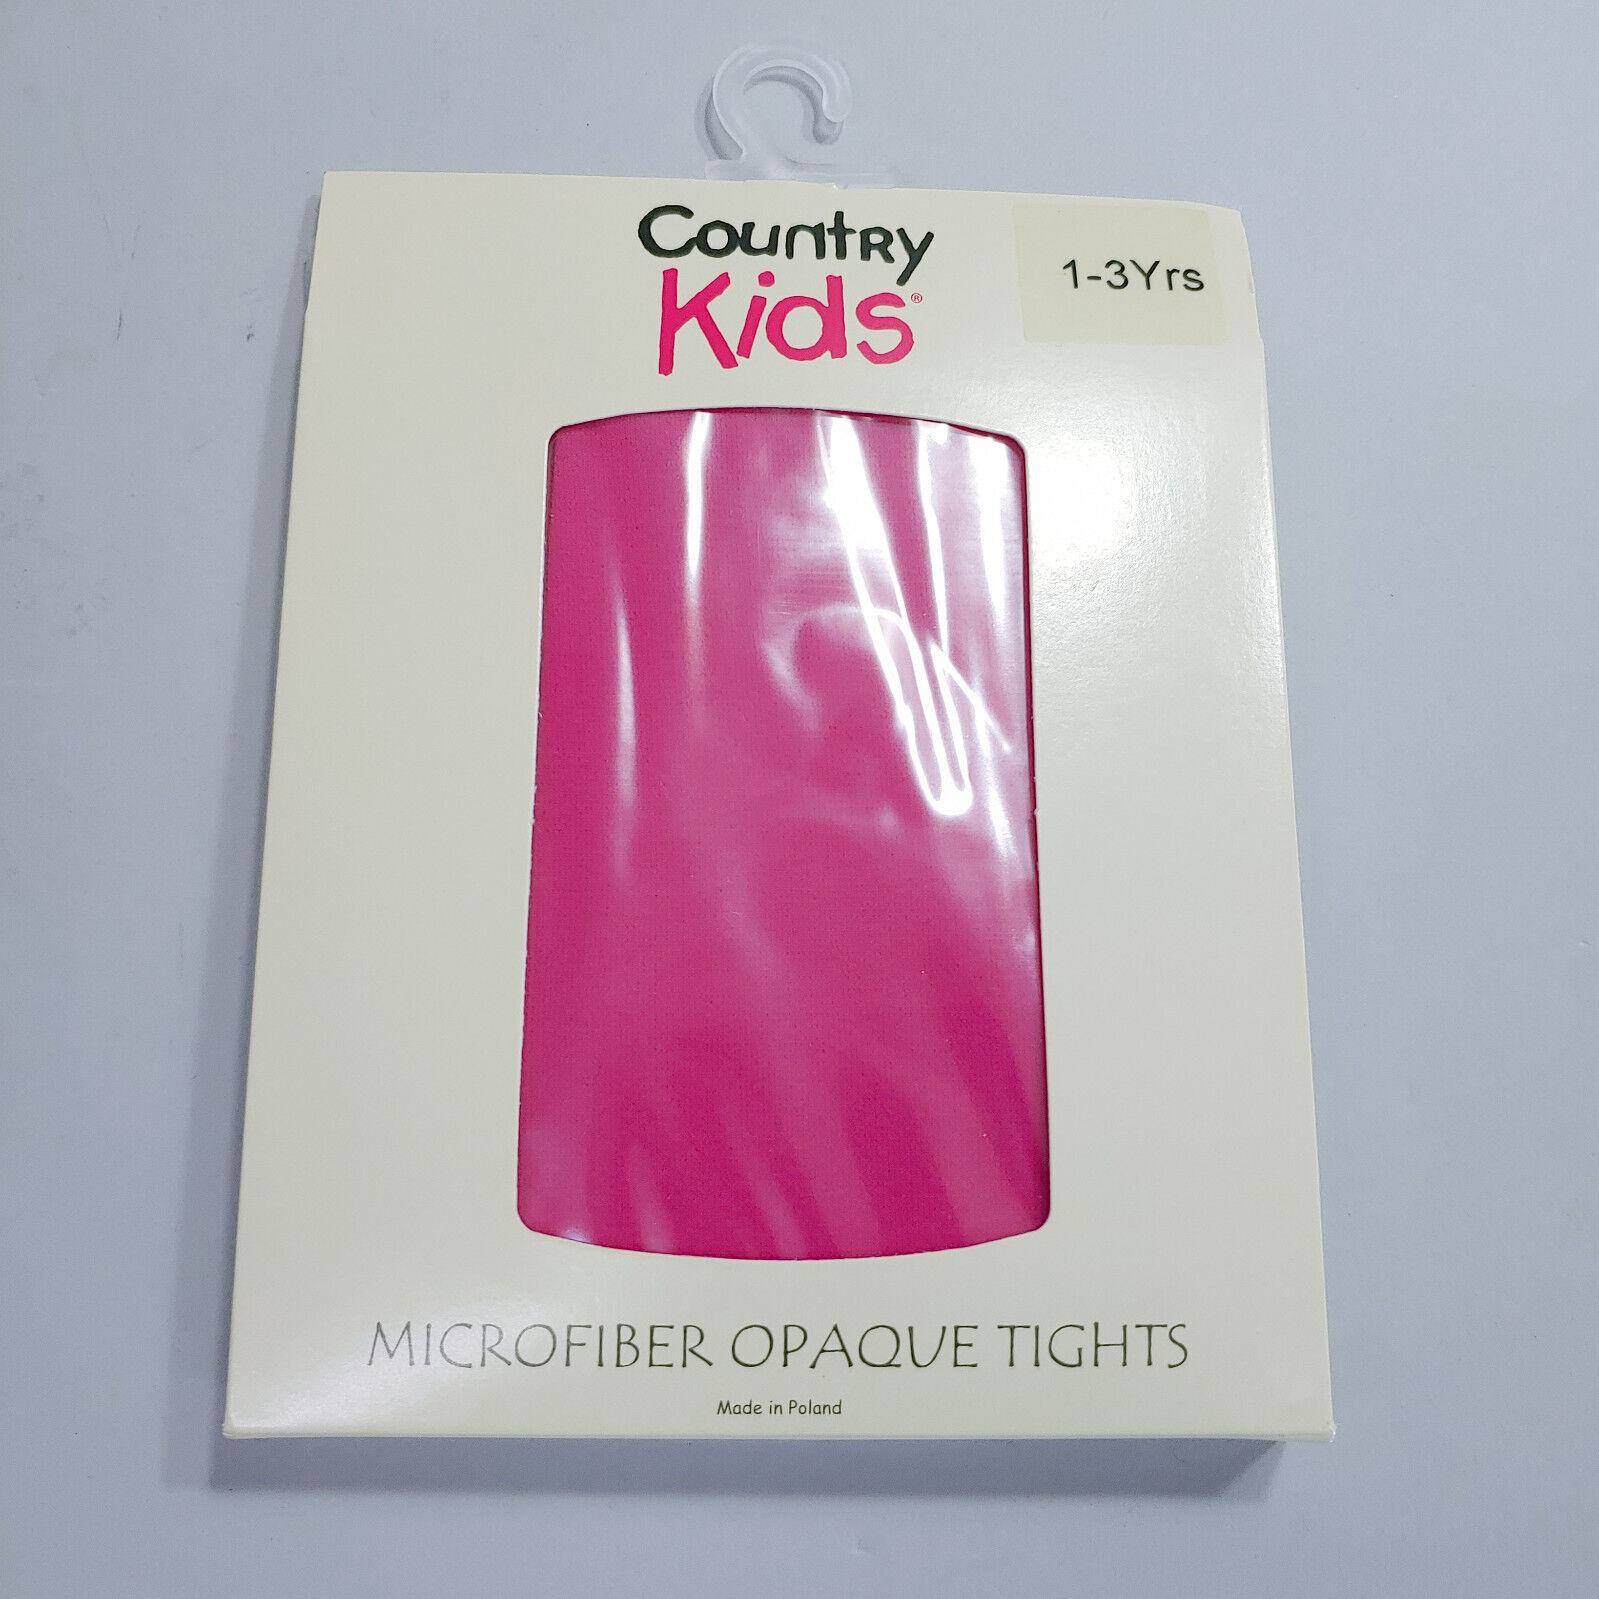 Country Kids Hot Pink Microfiber Opaque Tights Size 1-3 Years 